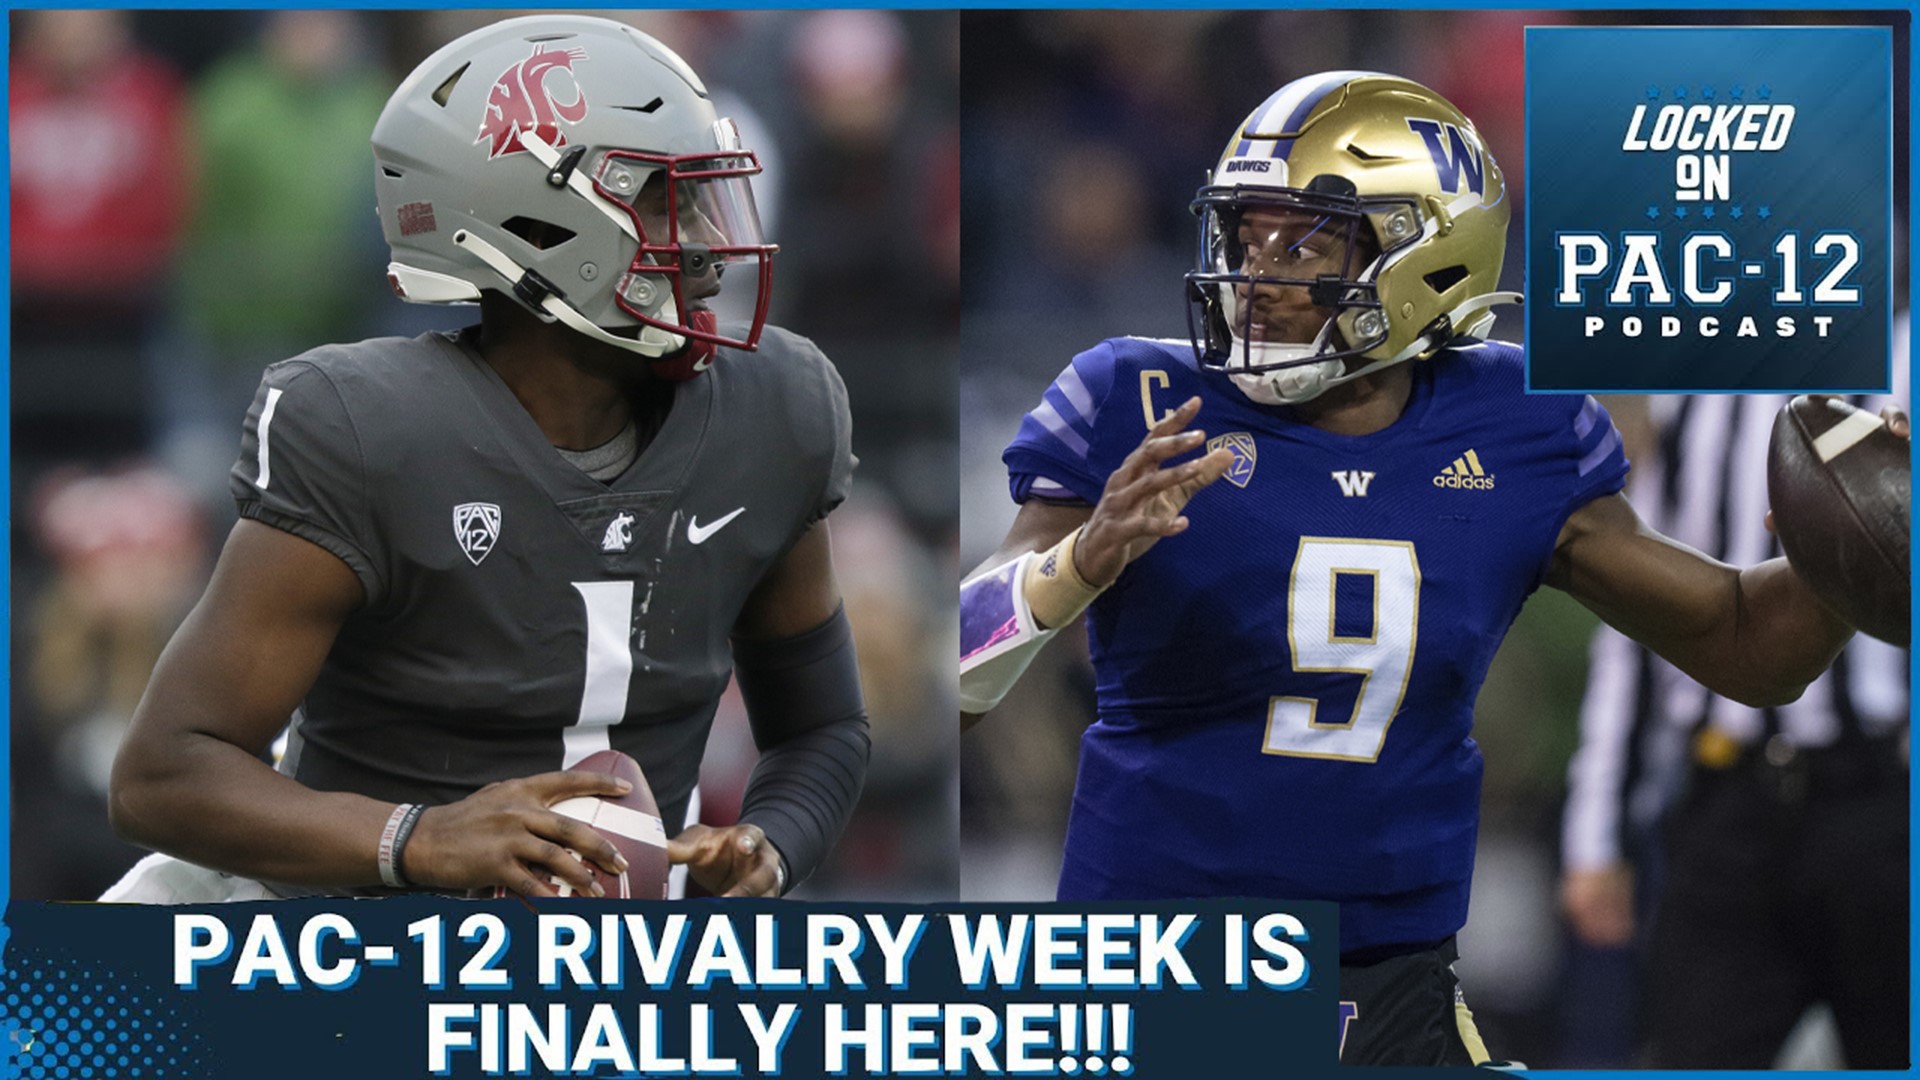 USC vs Notre Dame, Washington State hosts the University of Washington in the Apple Cup, and Oregon travels to Oregon State in the biggest rivalries of the weekend.